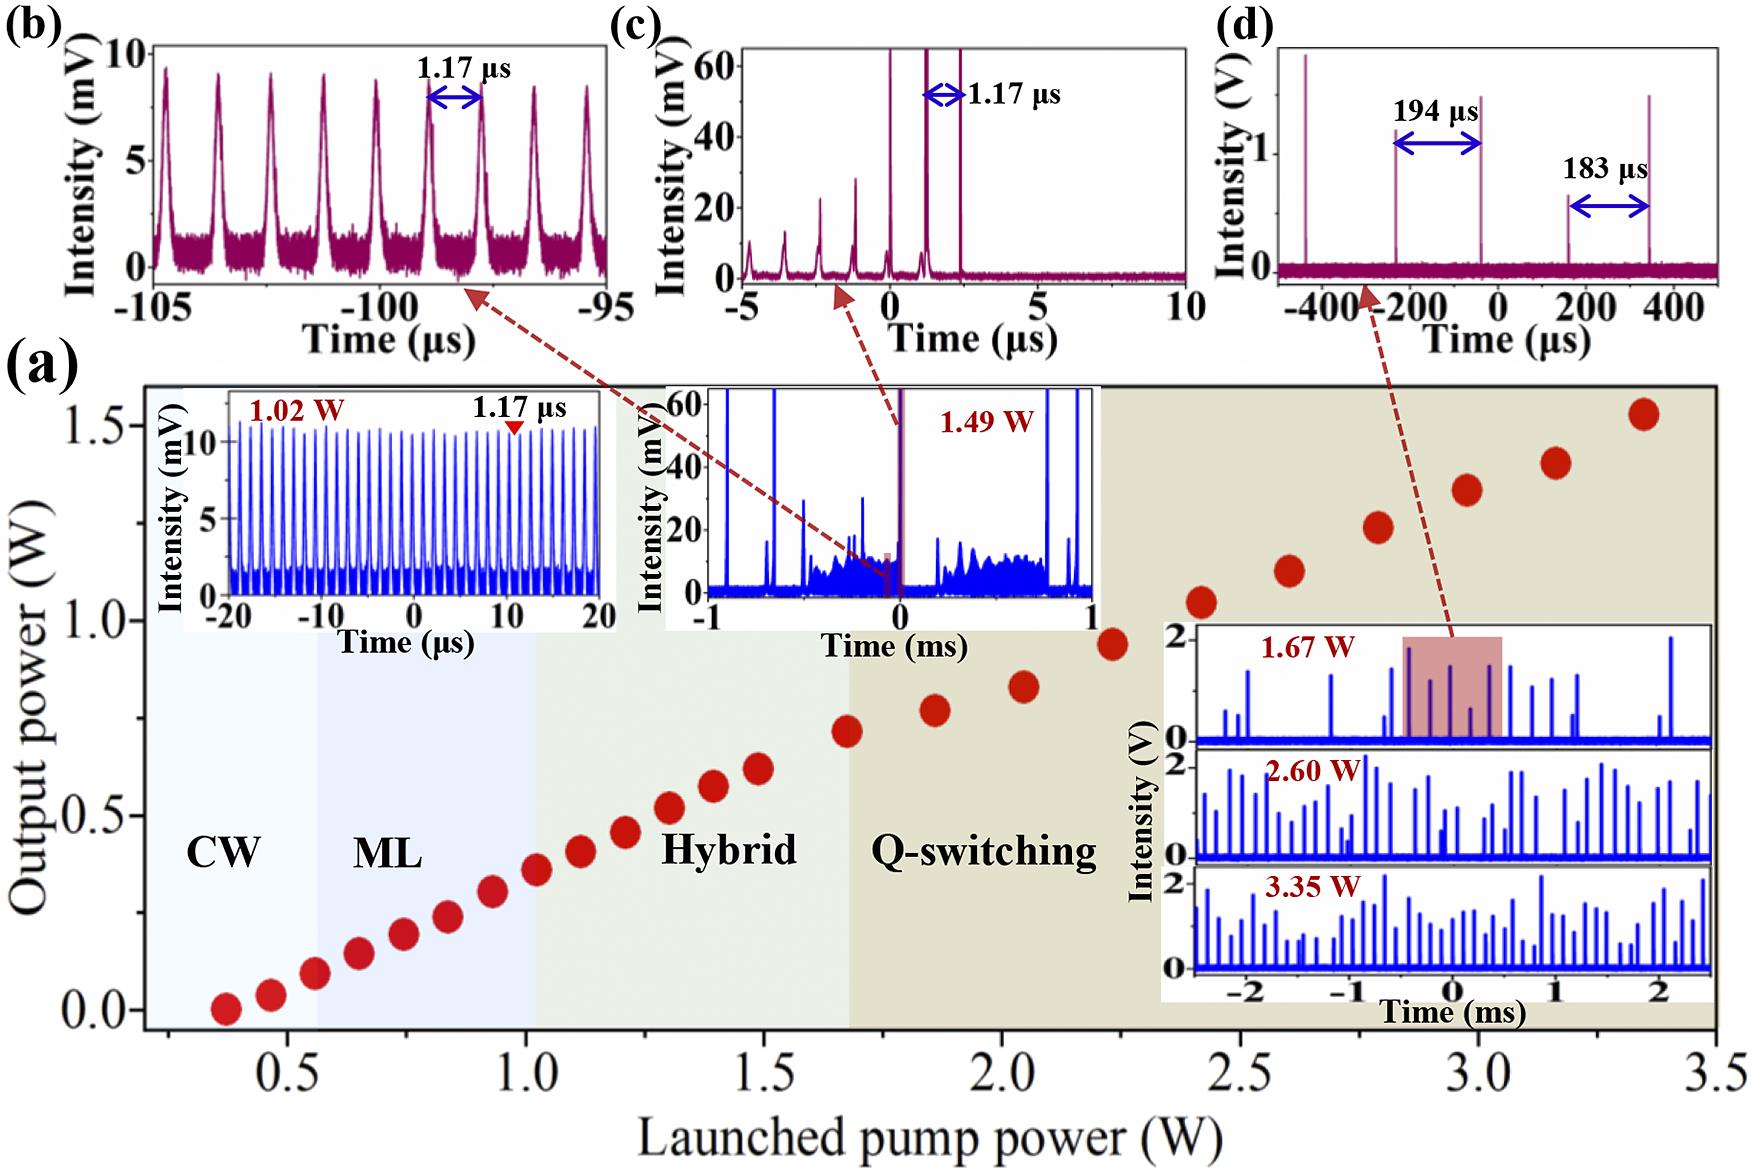 (a) Output characteristics of the RFL as a function of pump power. Inset (from left to right): temporal pulse profiles in the mode-locking, hybrid and random Q-switching states, respectively. Zoomed-in view of the mode-locked pulses (b) and the consumed mode-locked pulses (c) in the hybrid state. (d) Zoomed-in view of the self-Q-switched pulses.